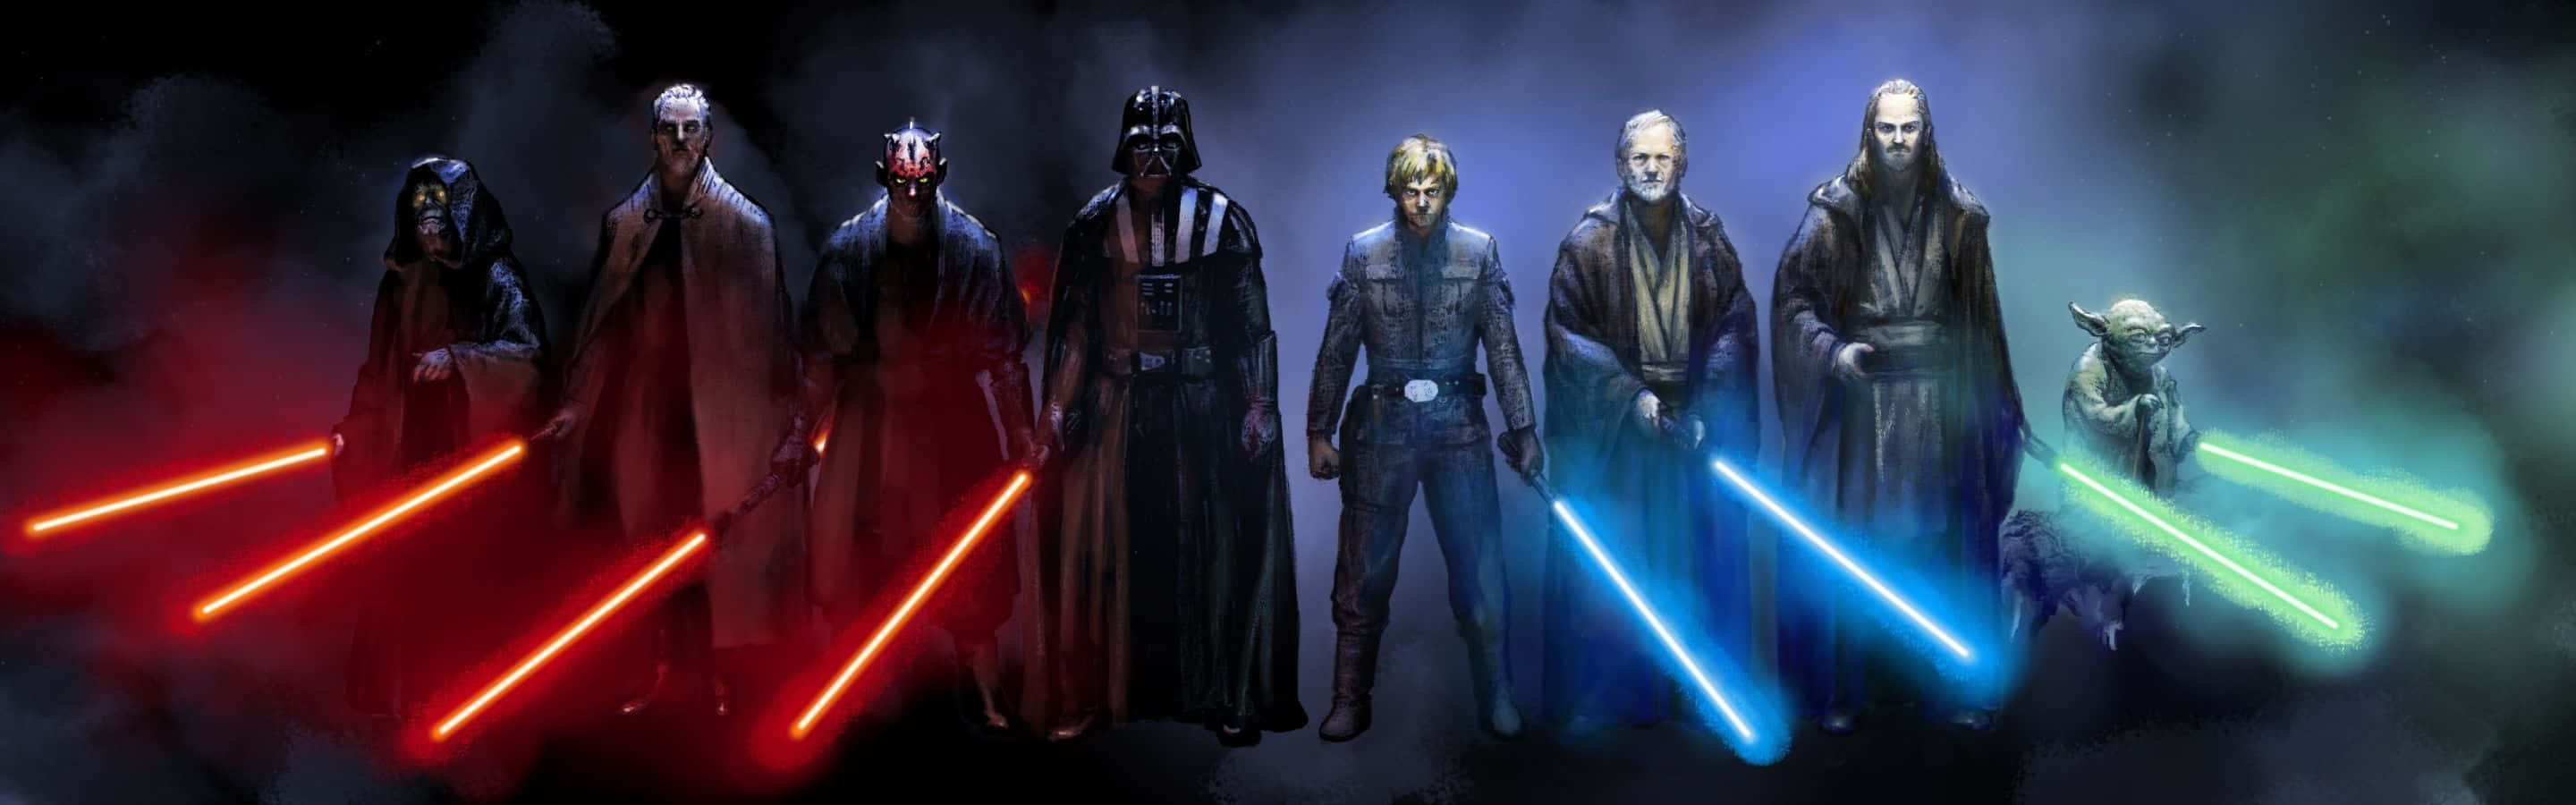 Sith And Jedi Best Monitor Background